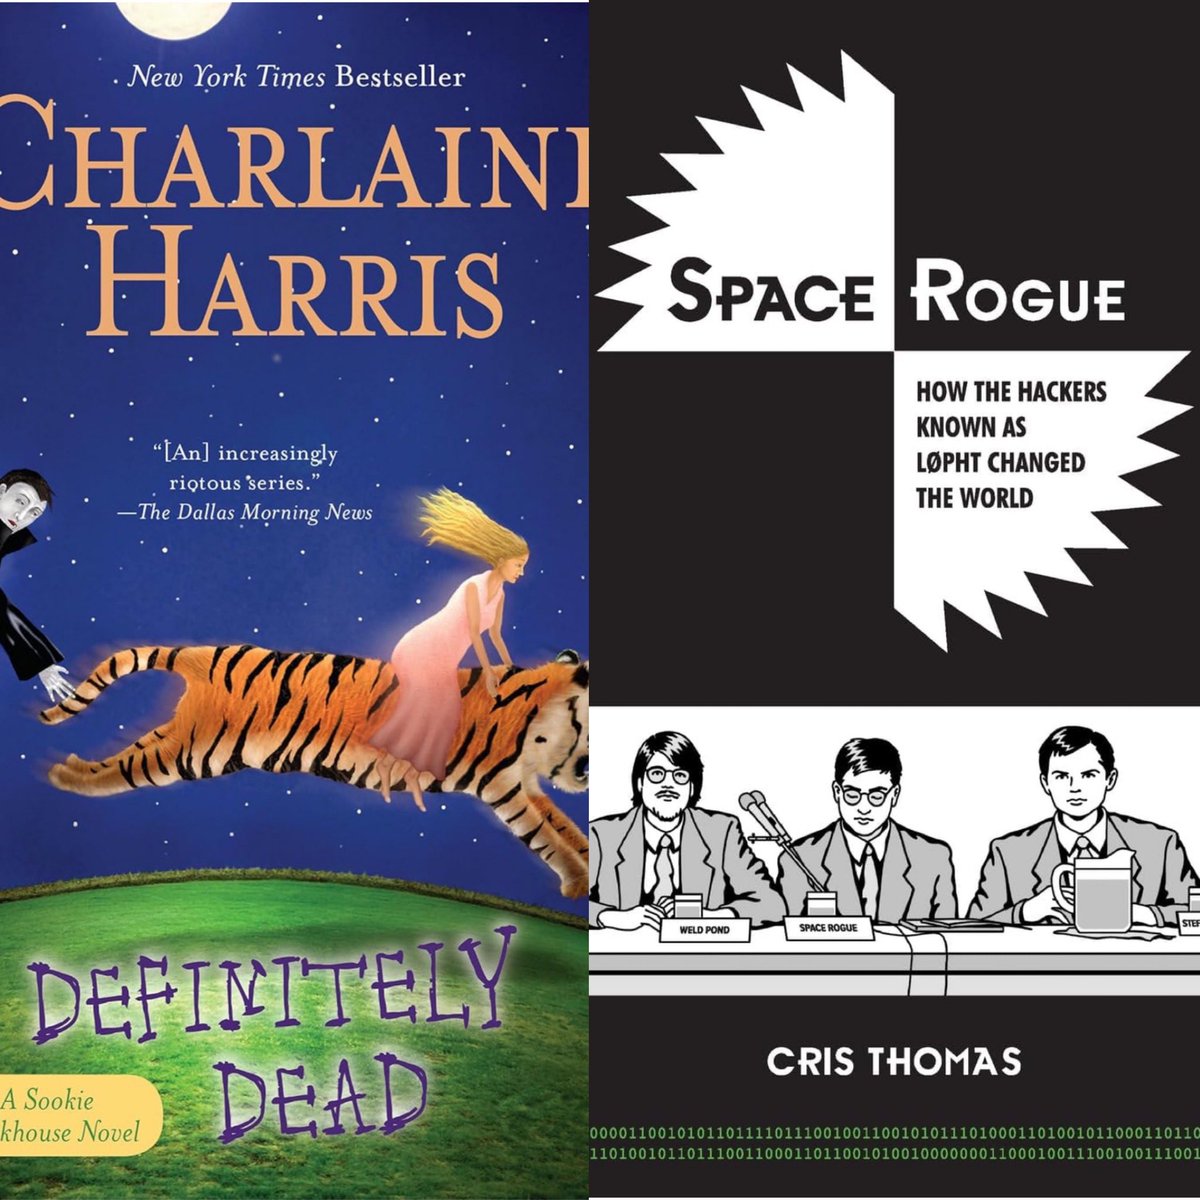 @BentleyAudrey Reading two books. Definitely Dead by Charlaine Harris and Space Rogue by @spacerog